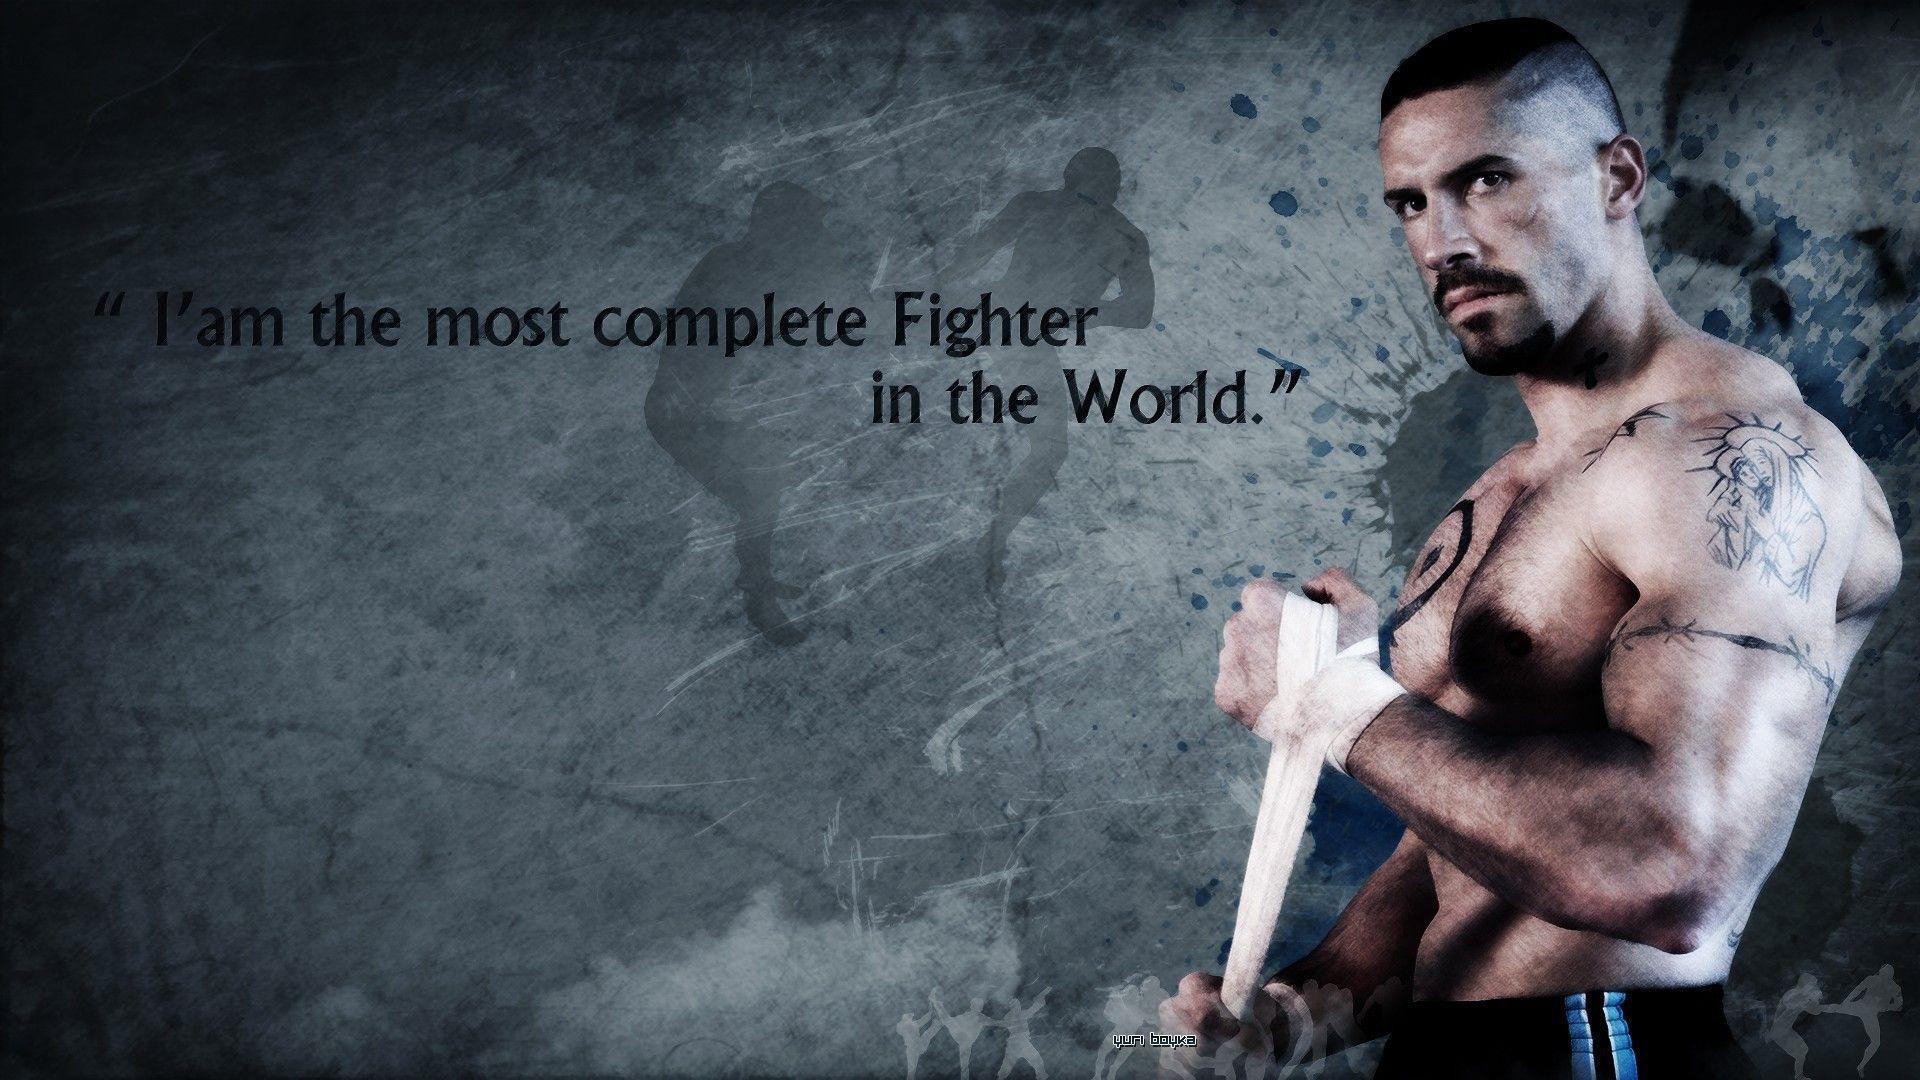 Scott Adkins  One more day until the NEW Boyka Undisputed FULL Trailer  Get ready for the most anticipated martial arts film of 2016  Facebook